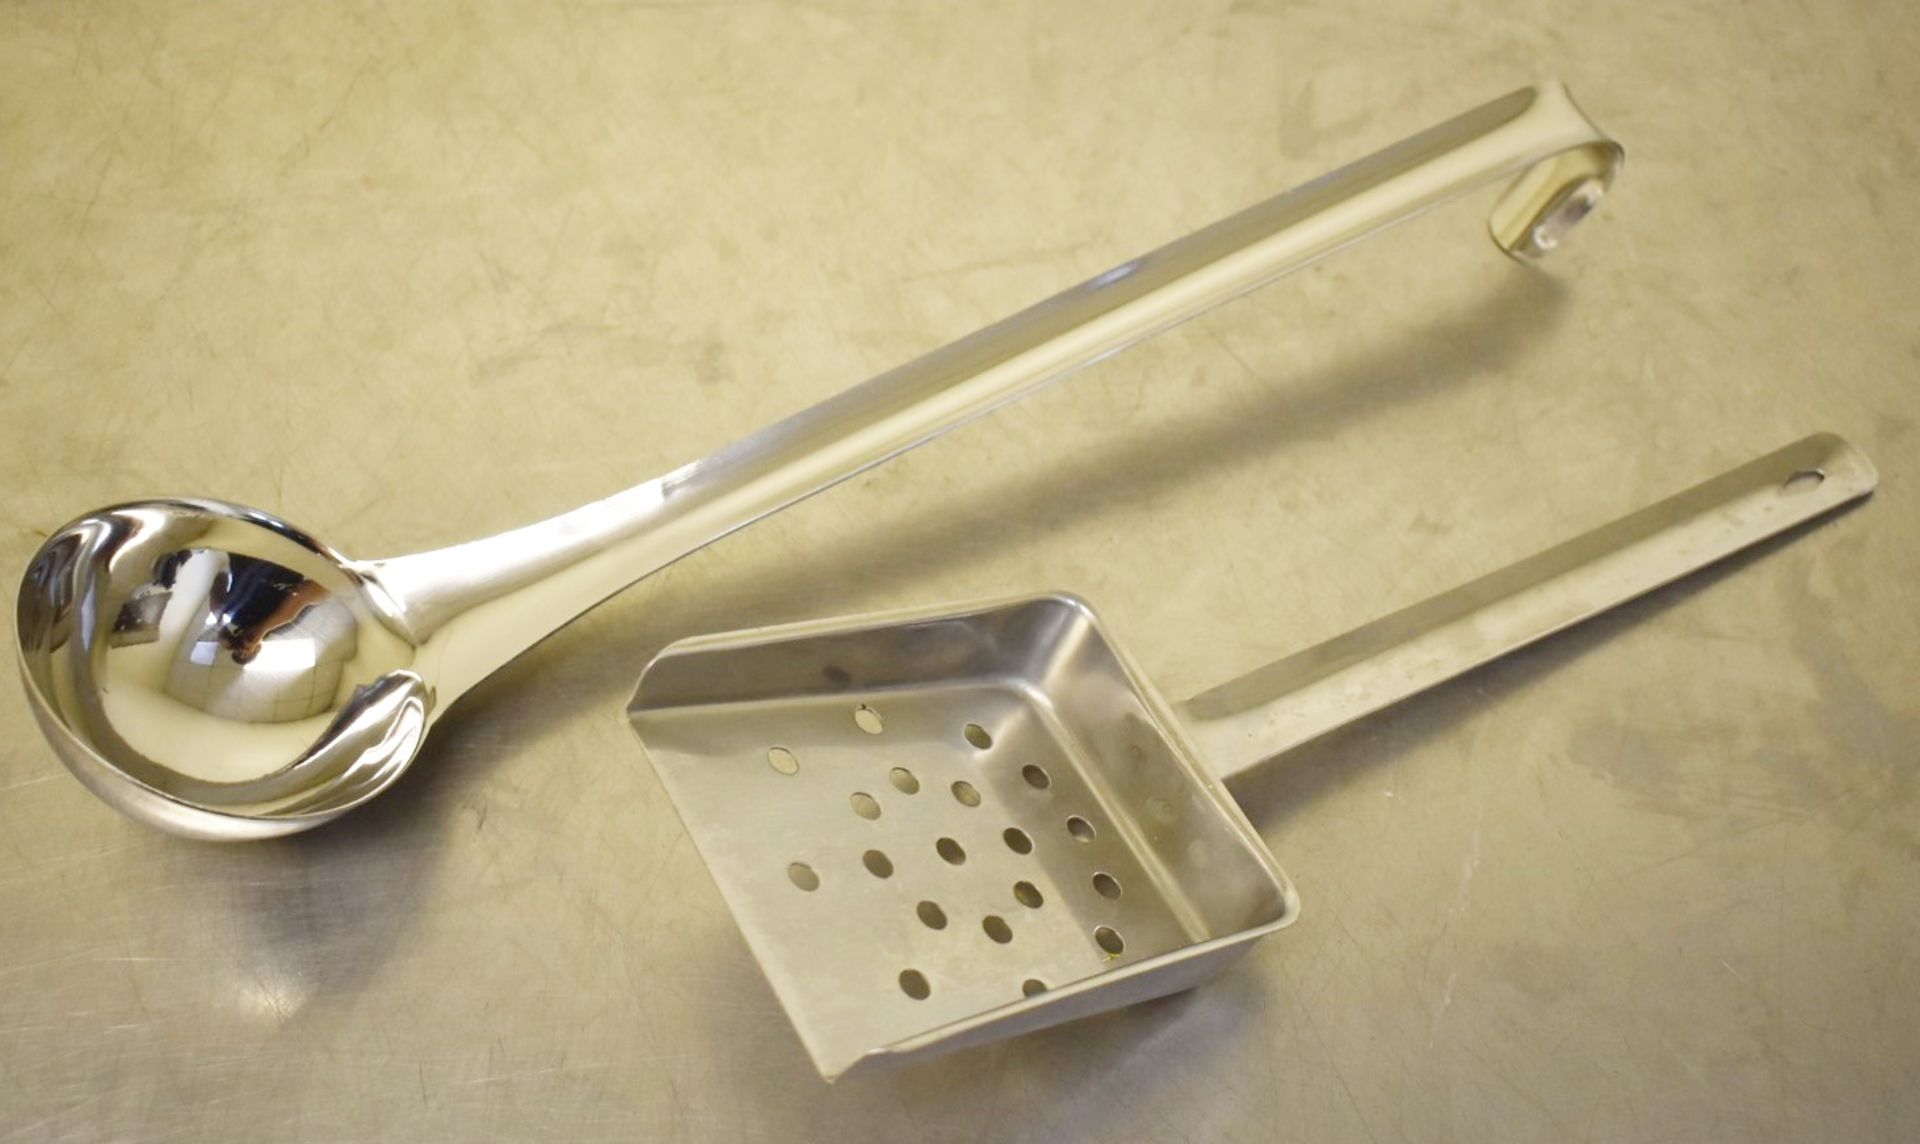 Approx 70 x Stainless Steel Chip Scoops and Soup Ladles - Brand New - Ref LD229 B2 - CL409 -